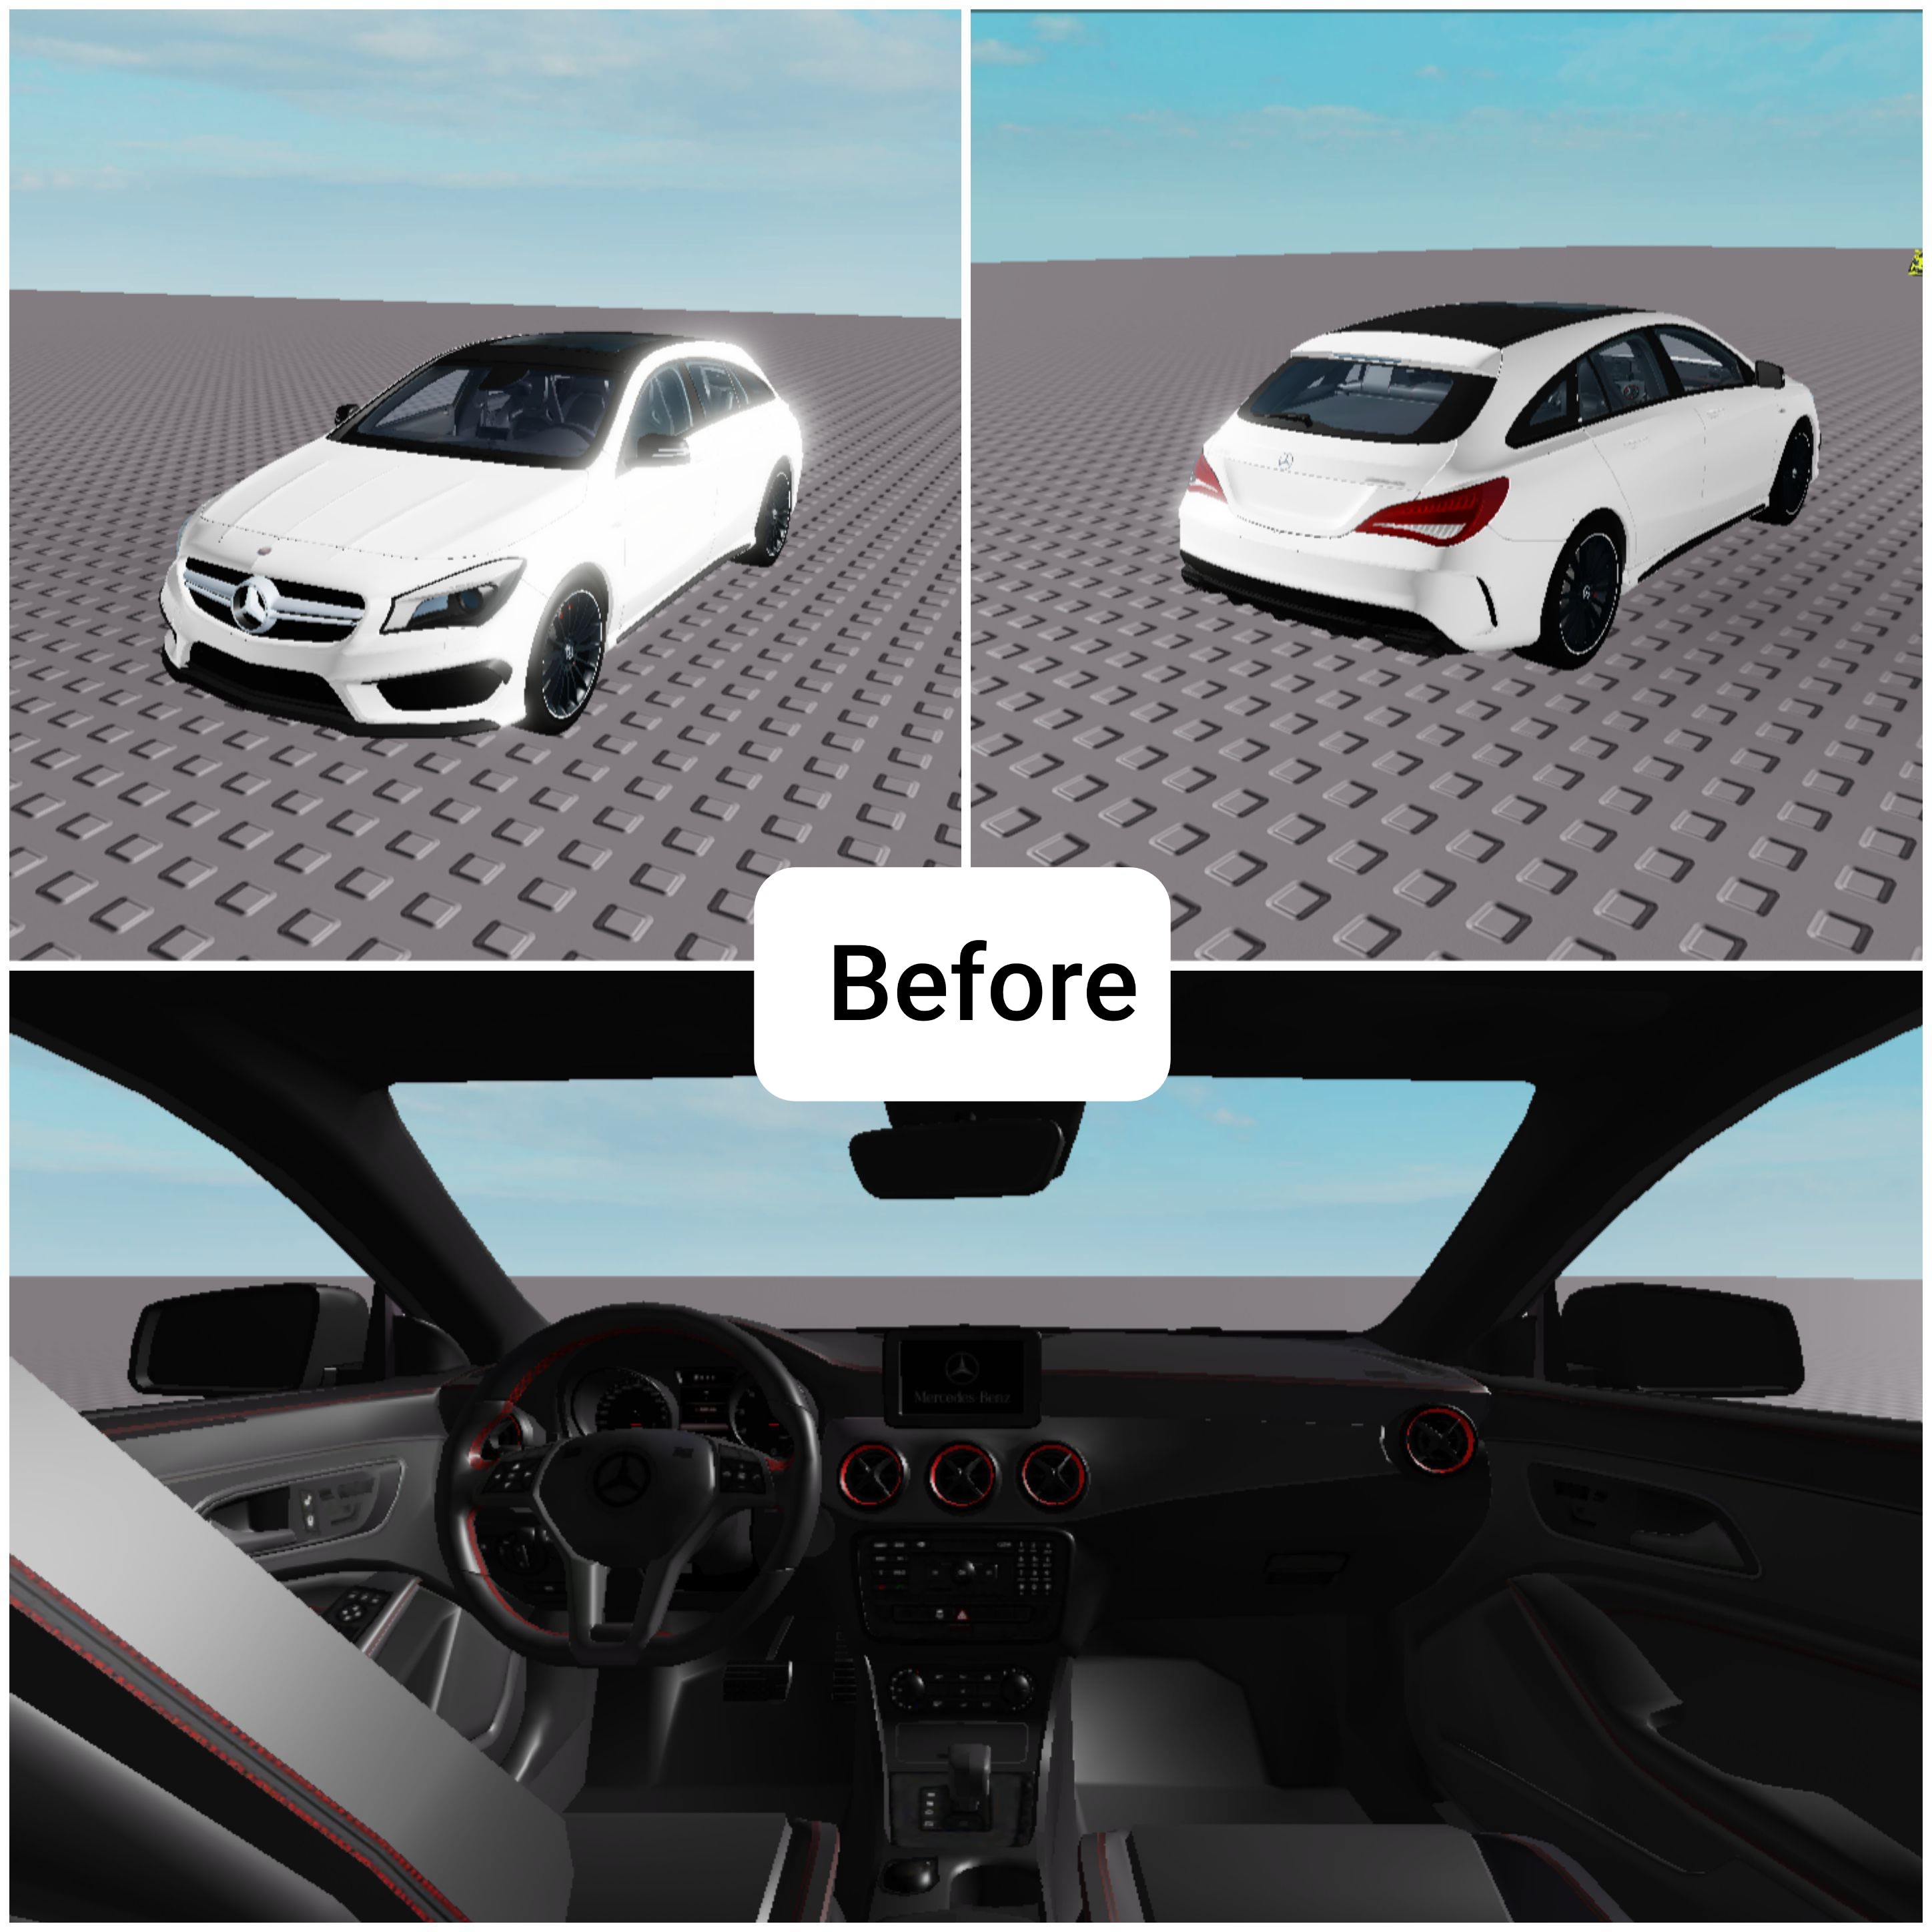 Modify Your Car Model In Roblox Studio With The Specifications You Desire By Sebastian Yeong Fiverr - how to make a working car in roblox studio 2021